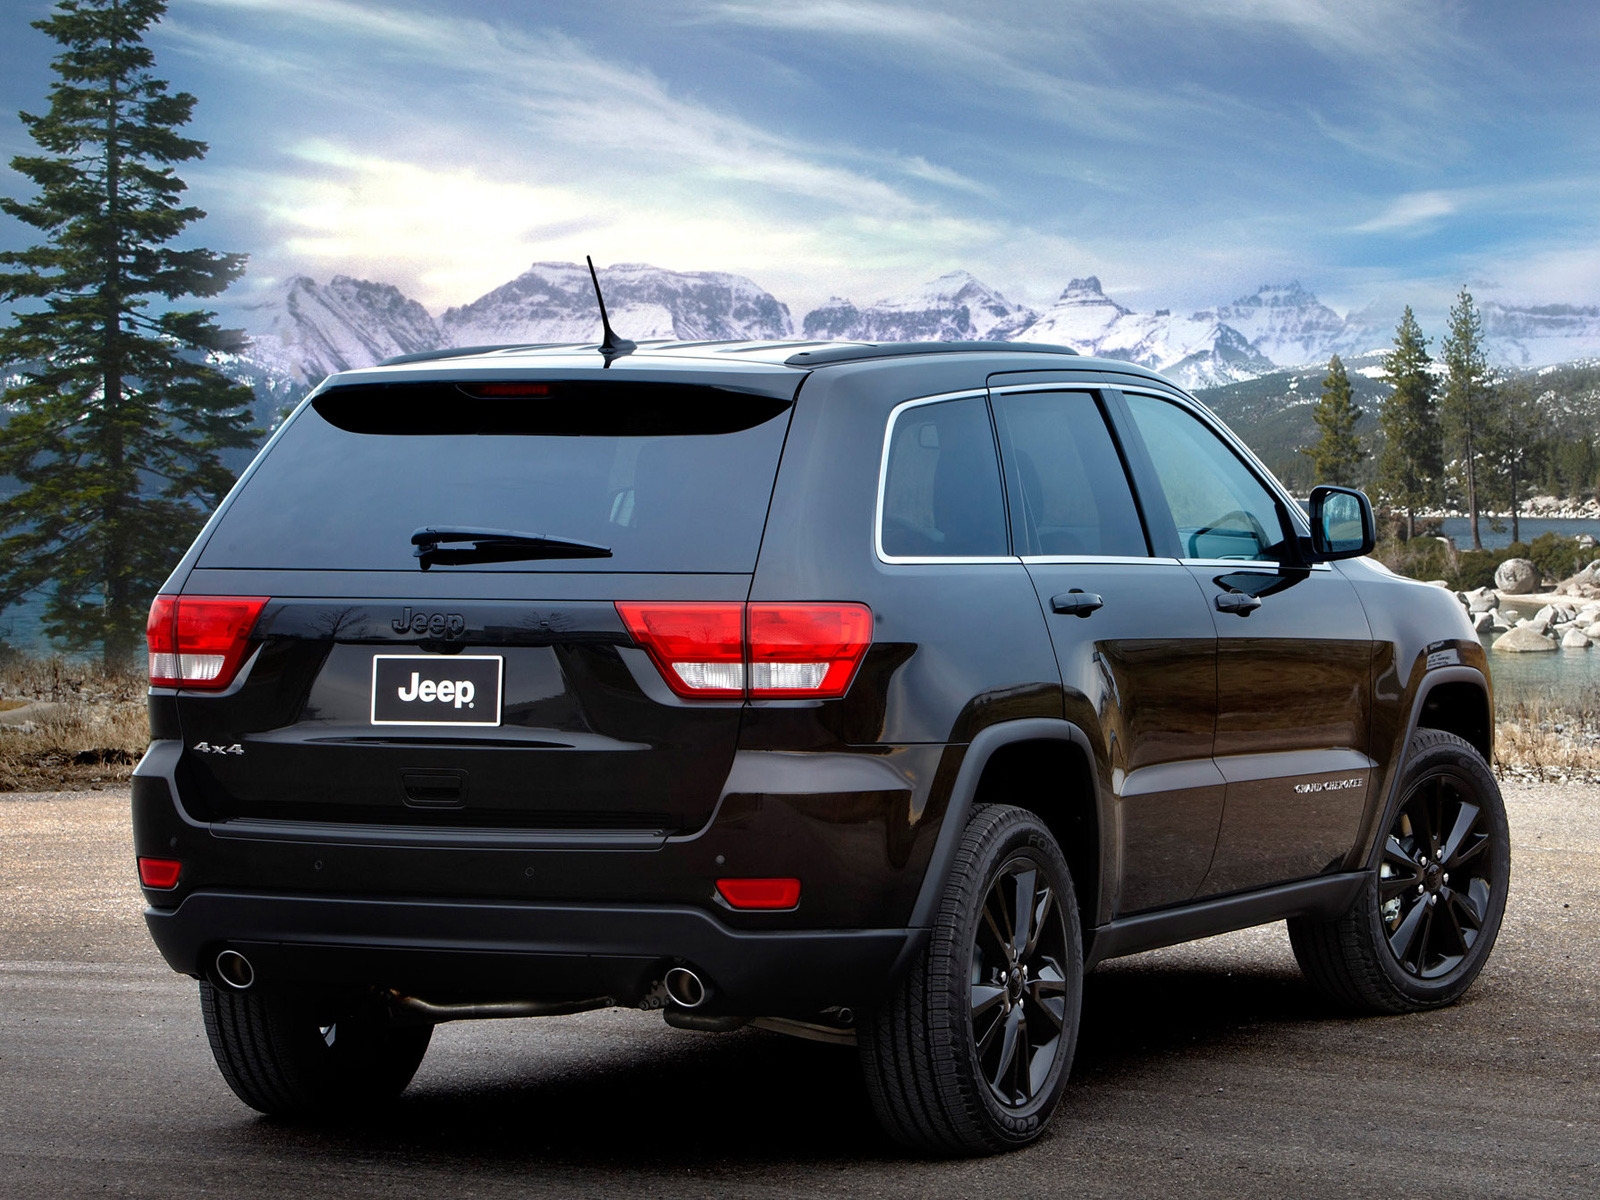 Jeep Grand Cherokee Concept for 1600 x 1200 resolution